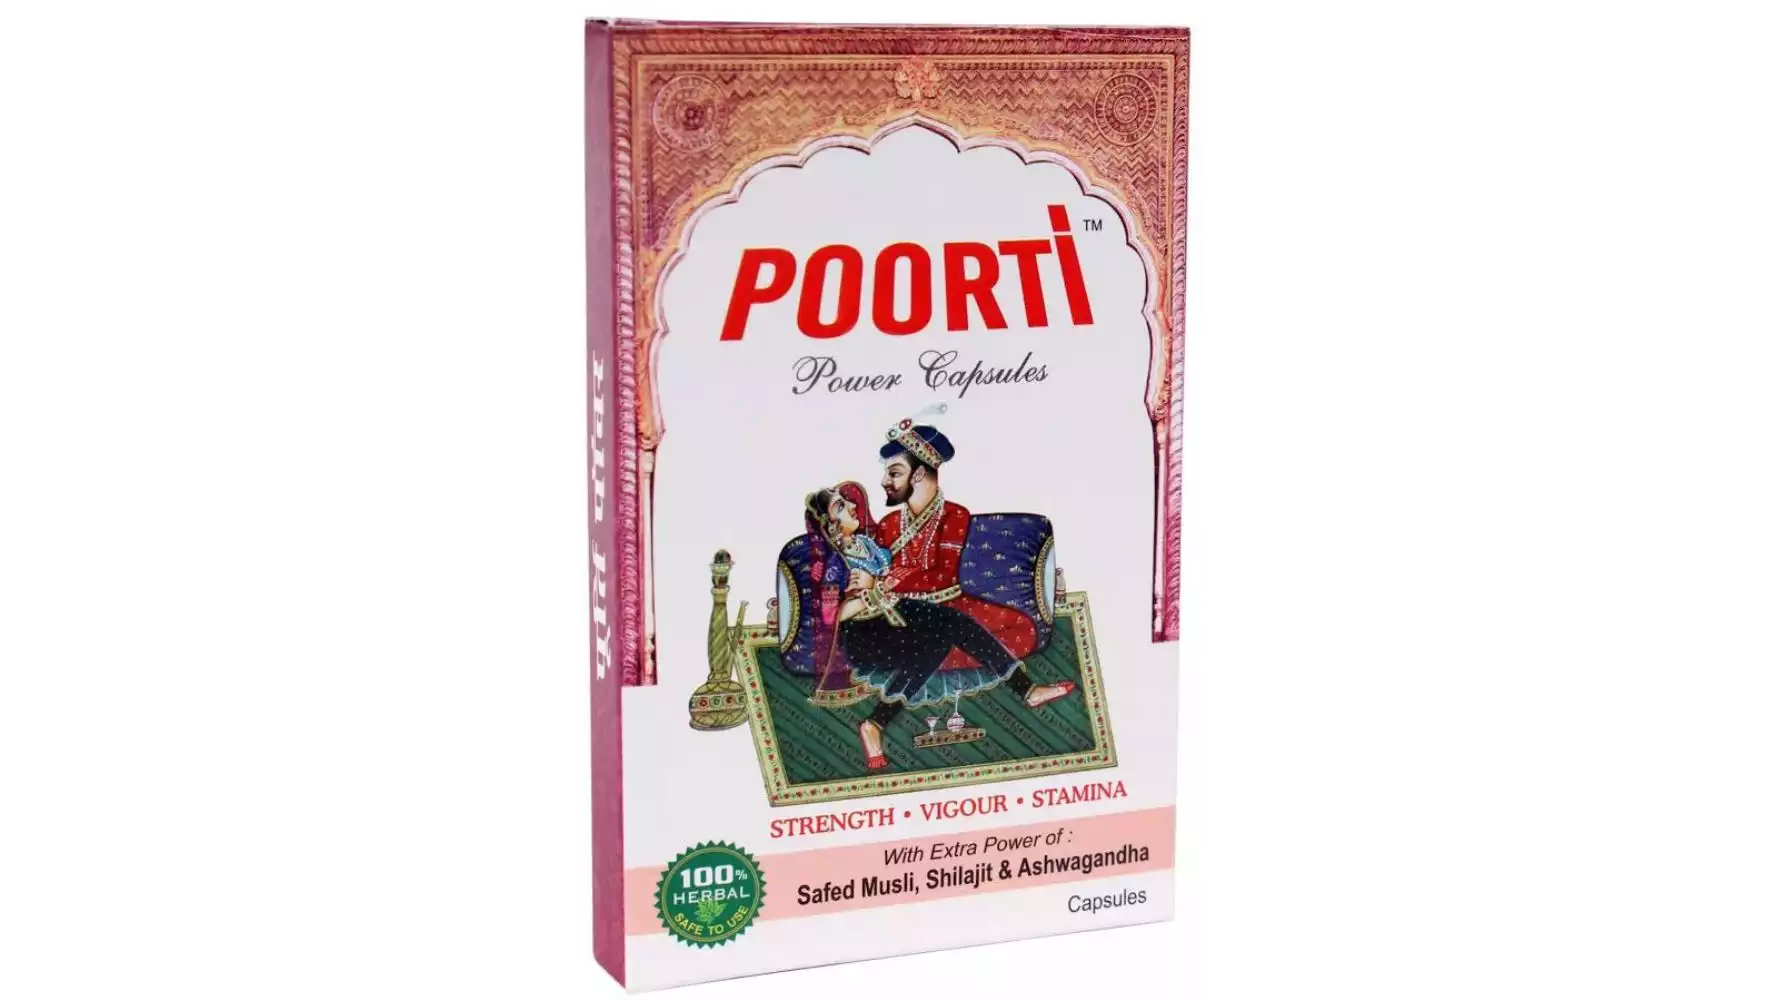 Poorti Capsules for Men's Enrich with Safed Musli, Ashwagandha & Shilajit extract (10caps)